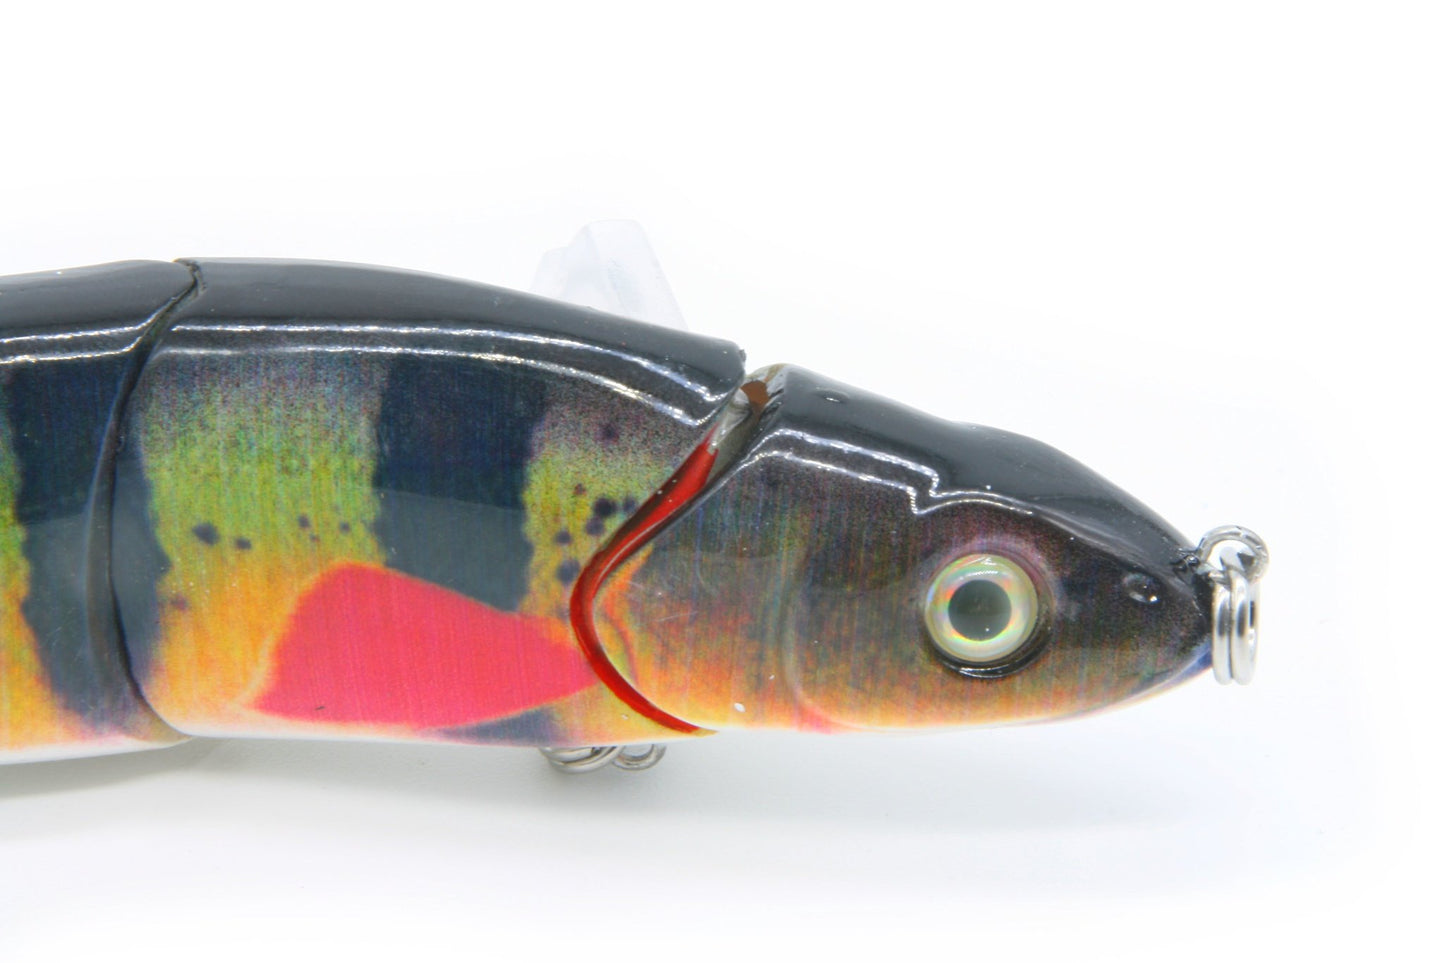 6.5" Jointed Dace